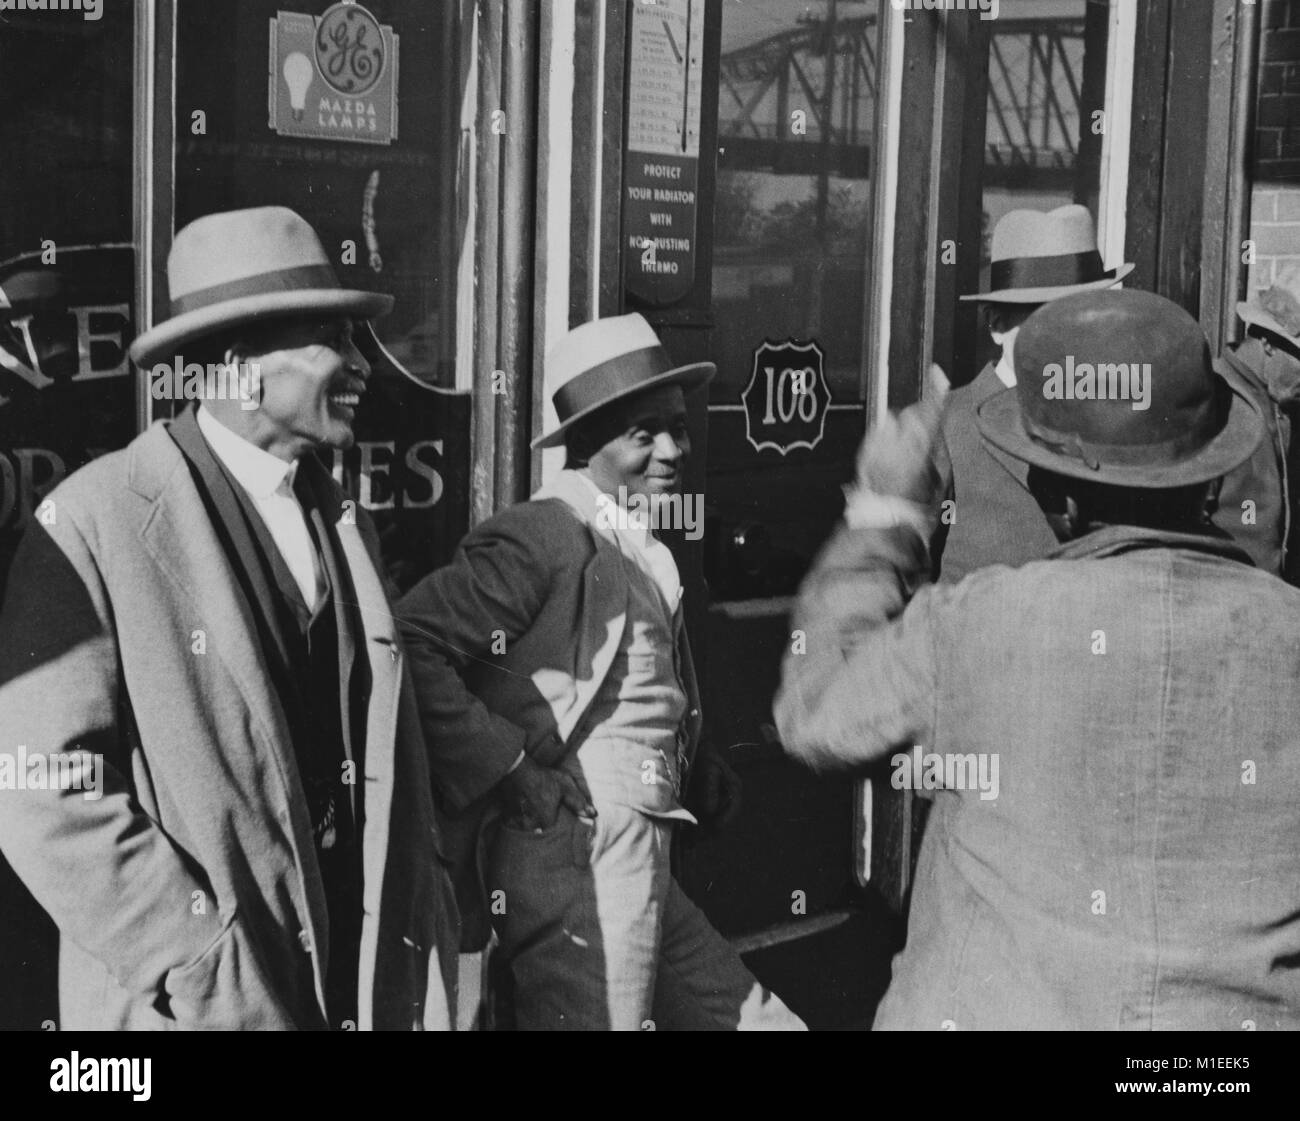 Four African American men talking at religious gathering, Nashville, Tennessee, USA, 1935. From the New York Public Library. () Stock Photo